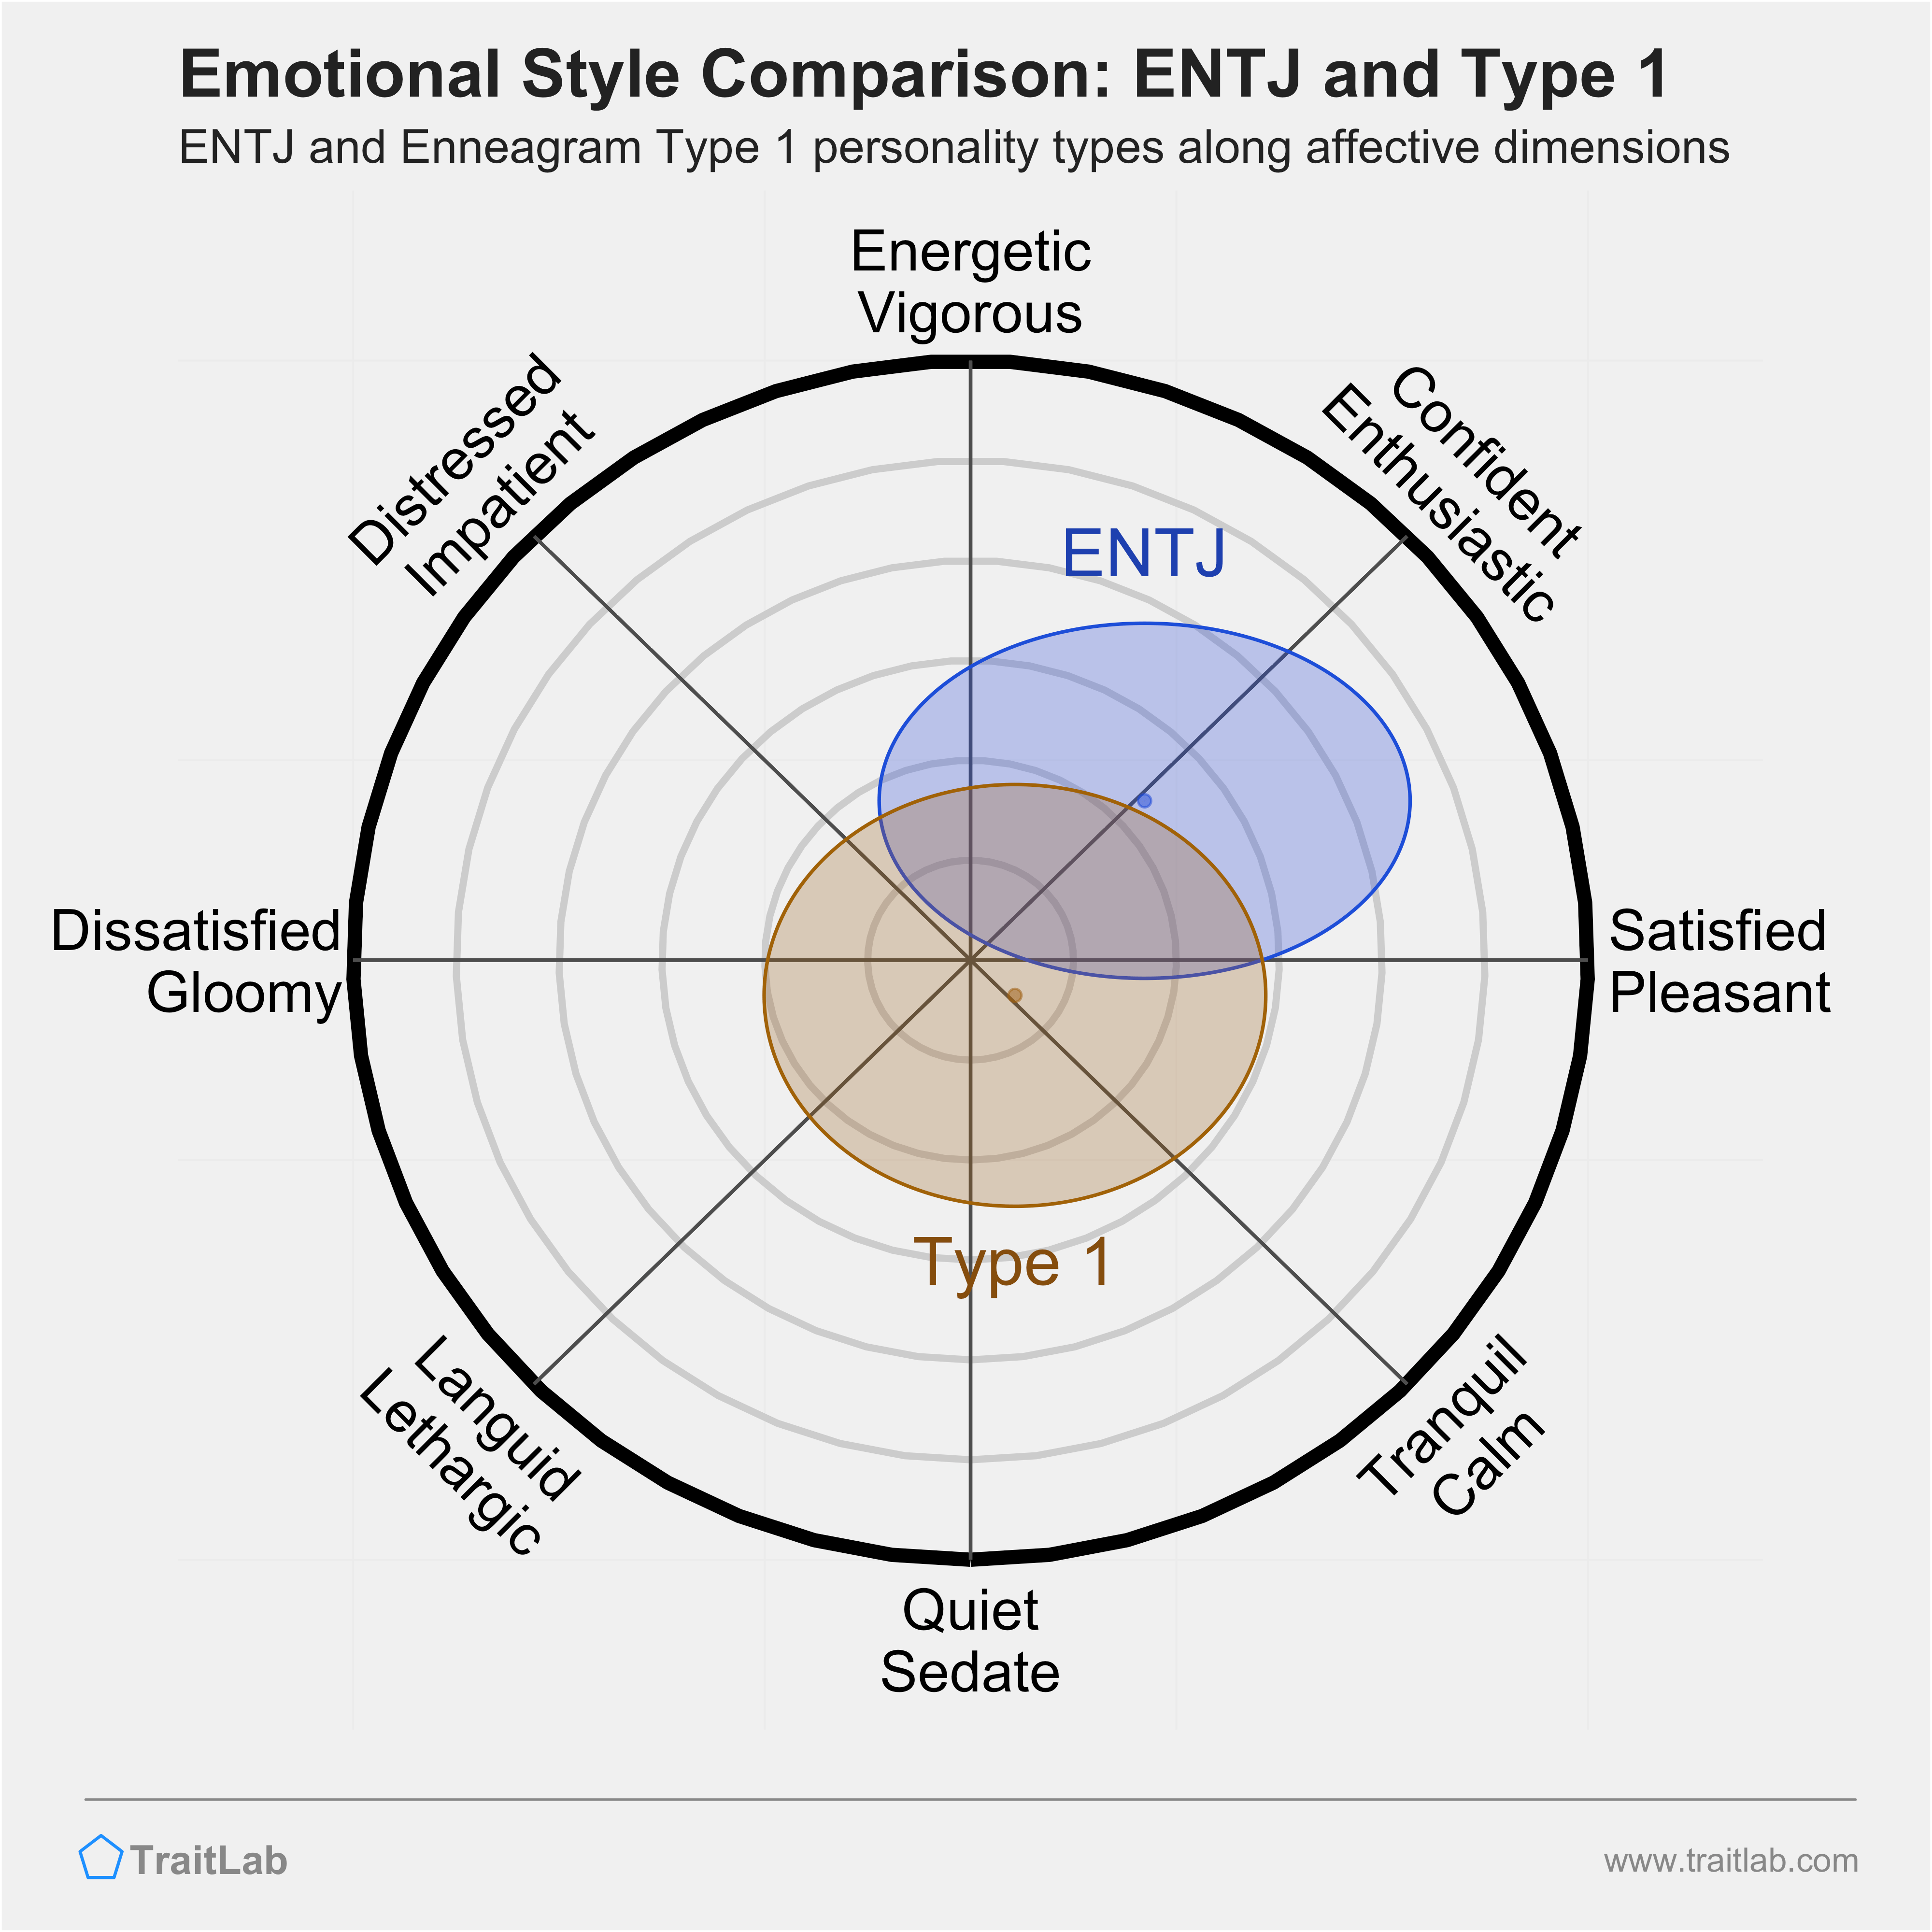 Compliments that hit differently for #ENTJ personality types! What's y